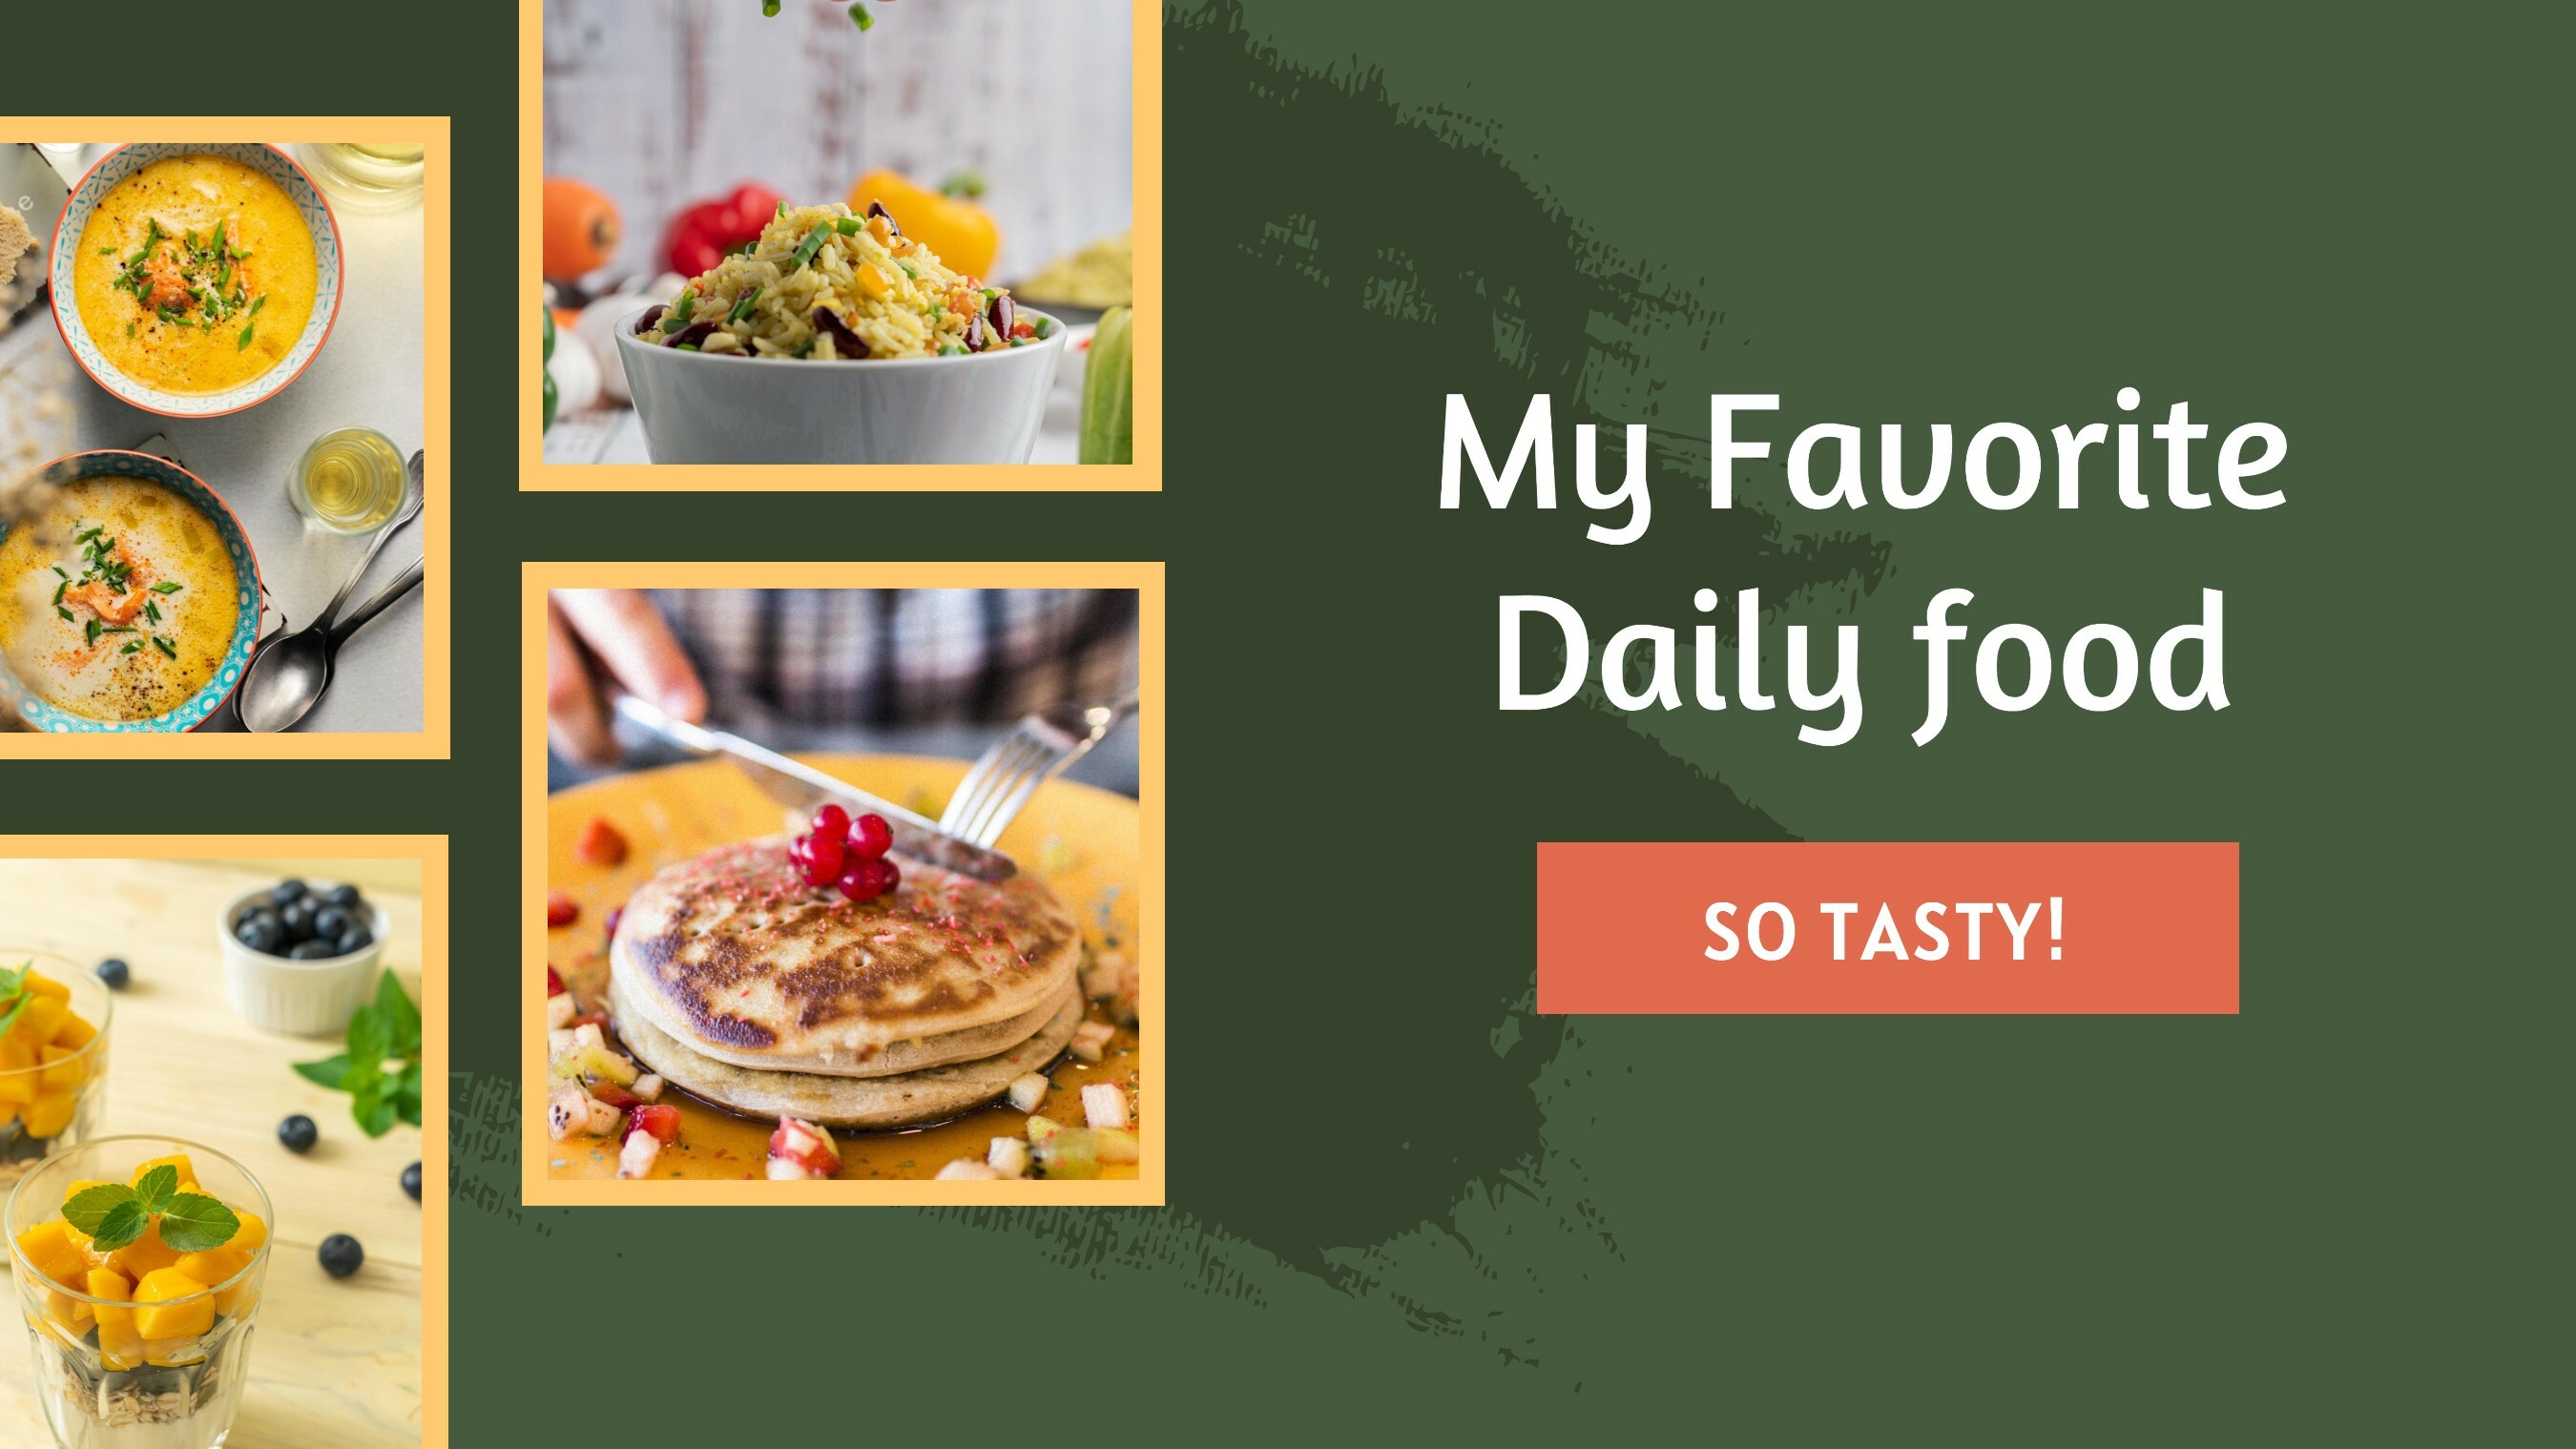 Green Collage Daily Favorite Food Youtube Banner template